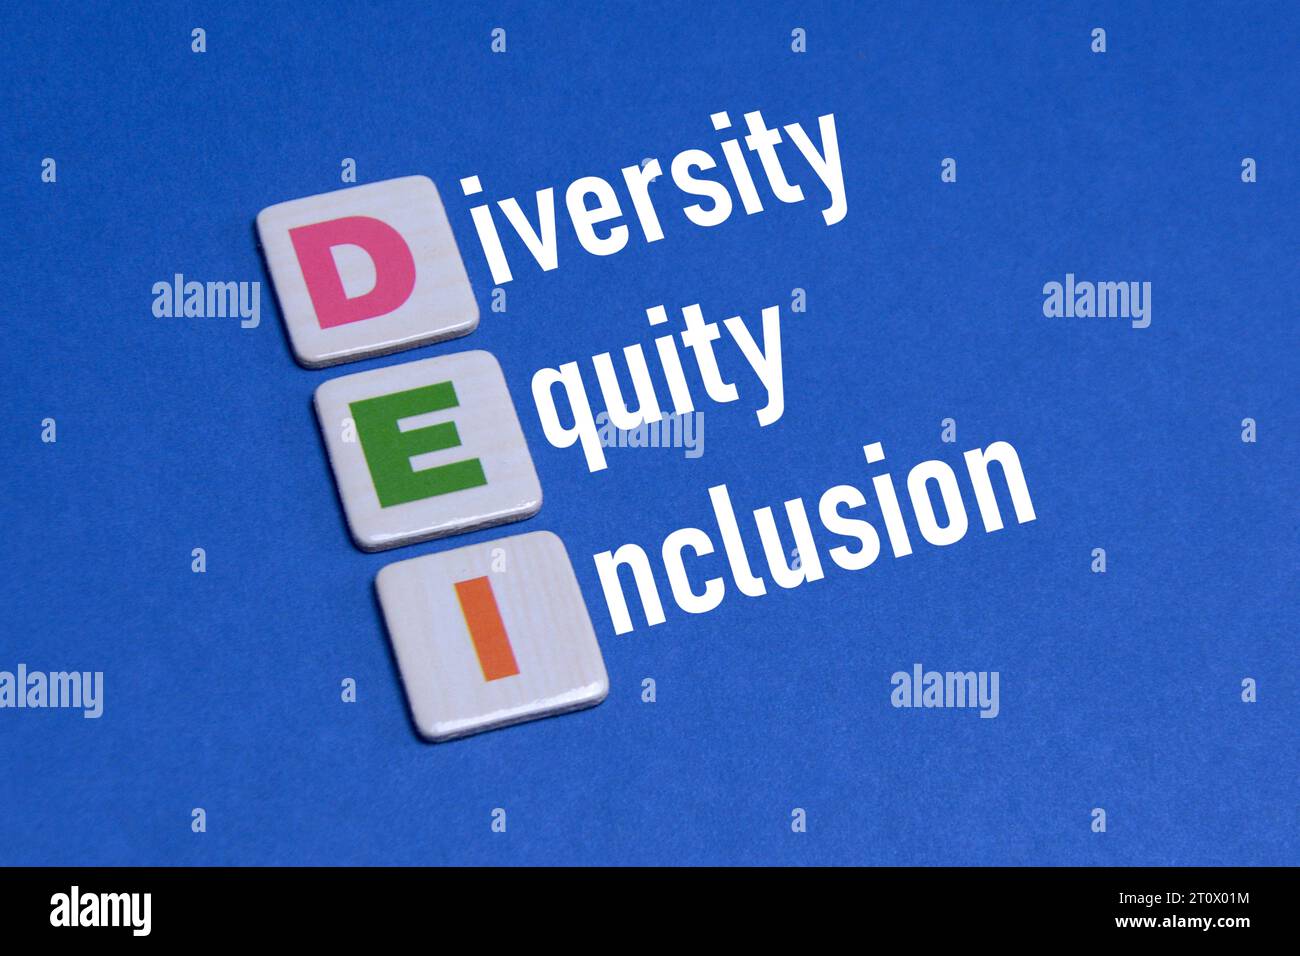 Diversity, Equity and Inclusion (DEI) Words. Colorful DEI Tiles Making Words: Diversity, Equity and Inclusion. Business Concept of DEI. Stock Photo